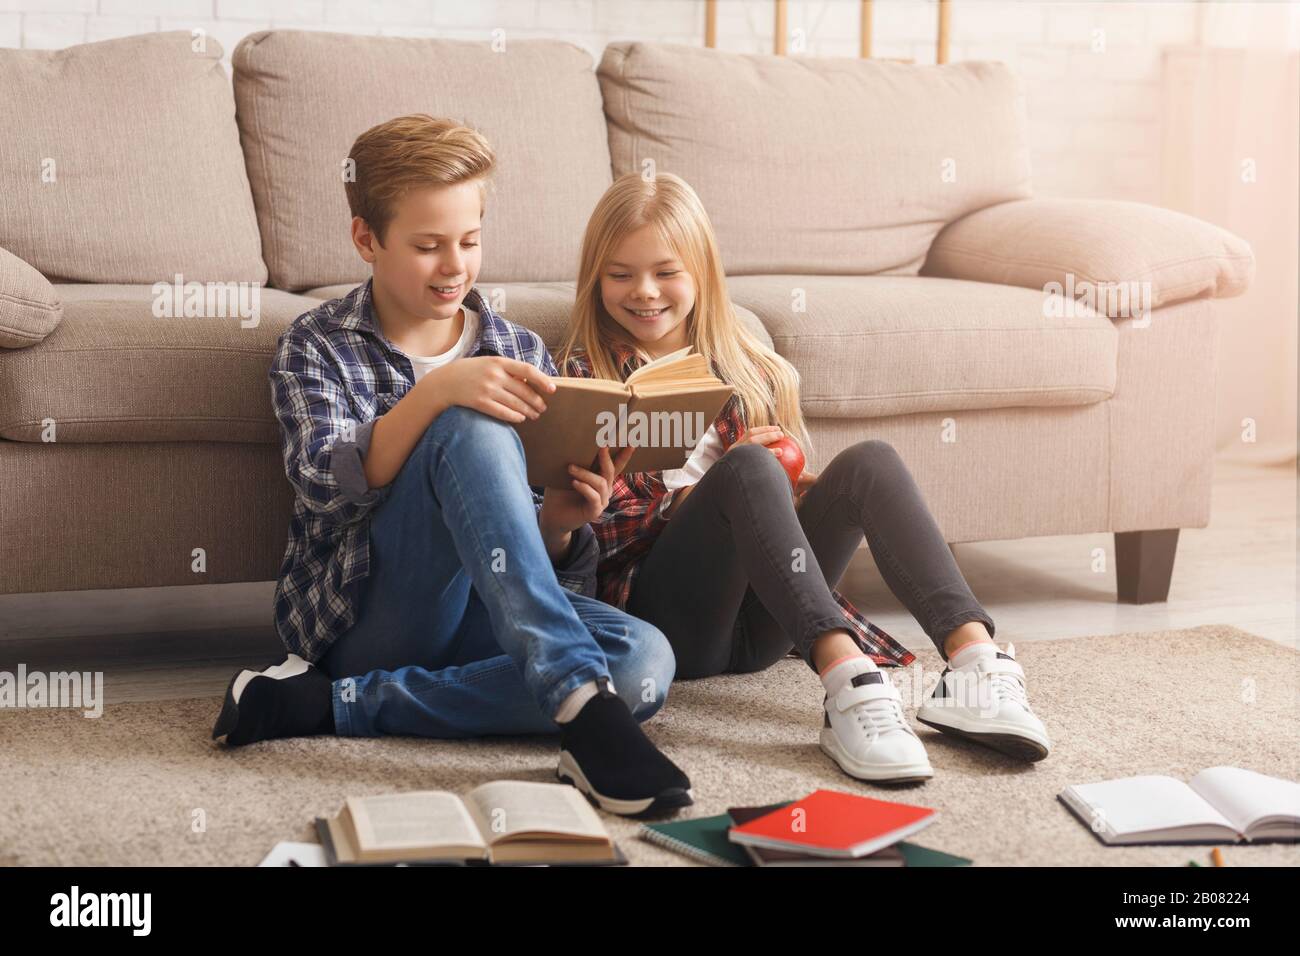 Siblings Reading Book Learning Together Sitting On Floor Indoor Stock Photo